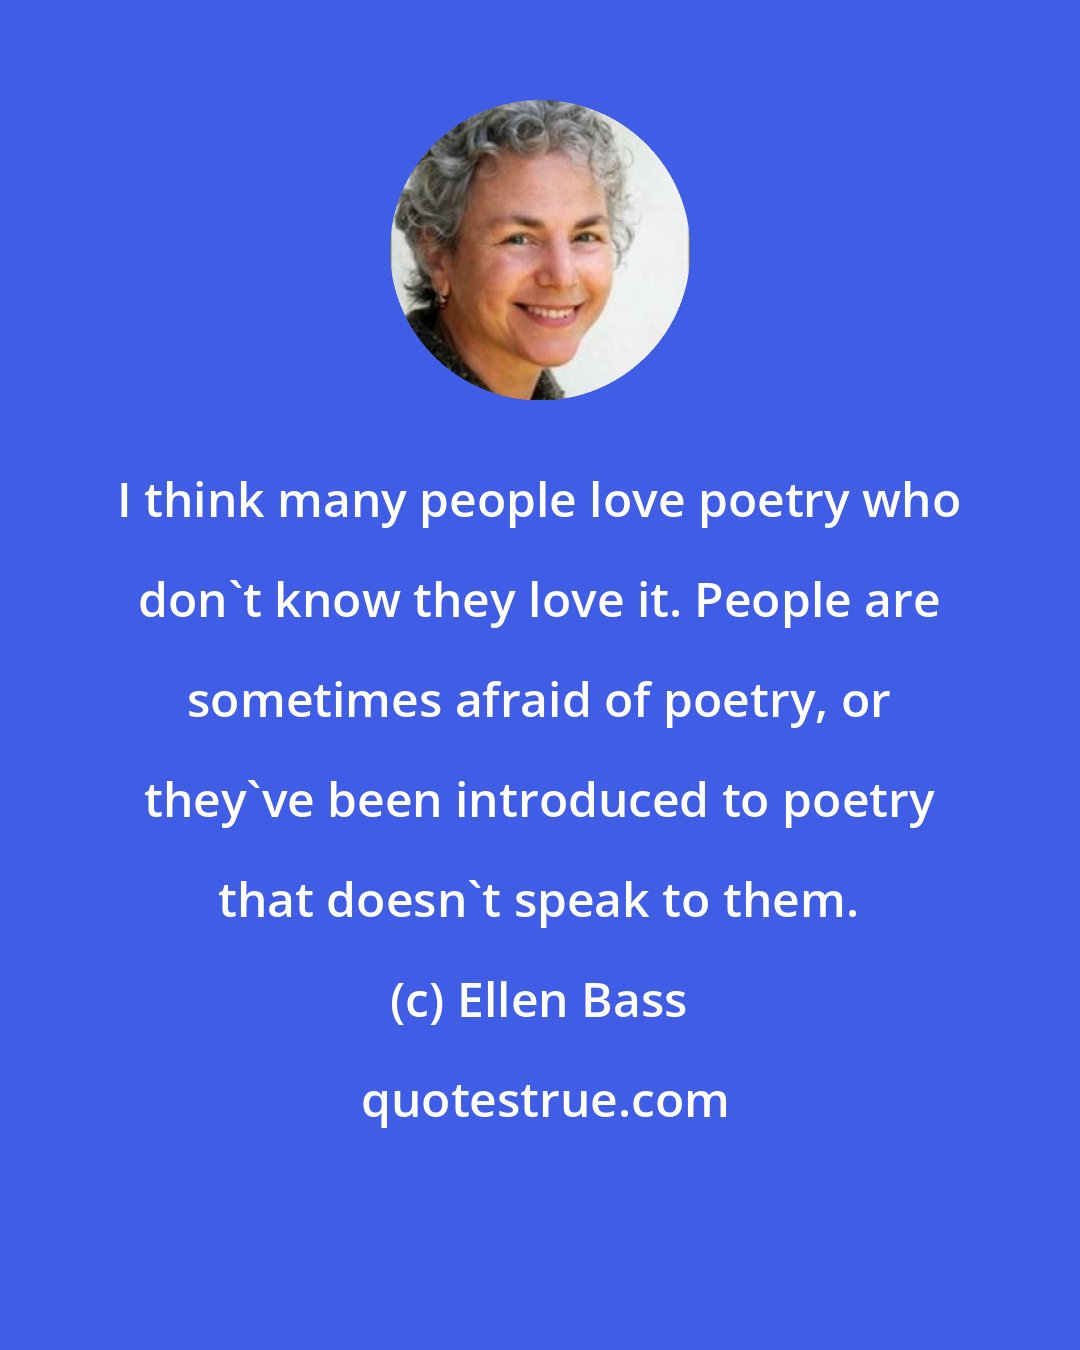 Ellen Bass: I think many people love poetry who don't know they love it. People are sometimes afraid of poetry, or they've been introduced to poetry that doesn't speak to them.